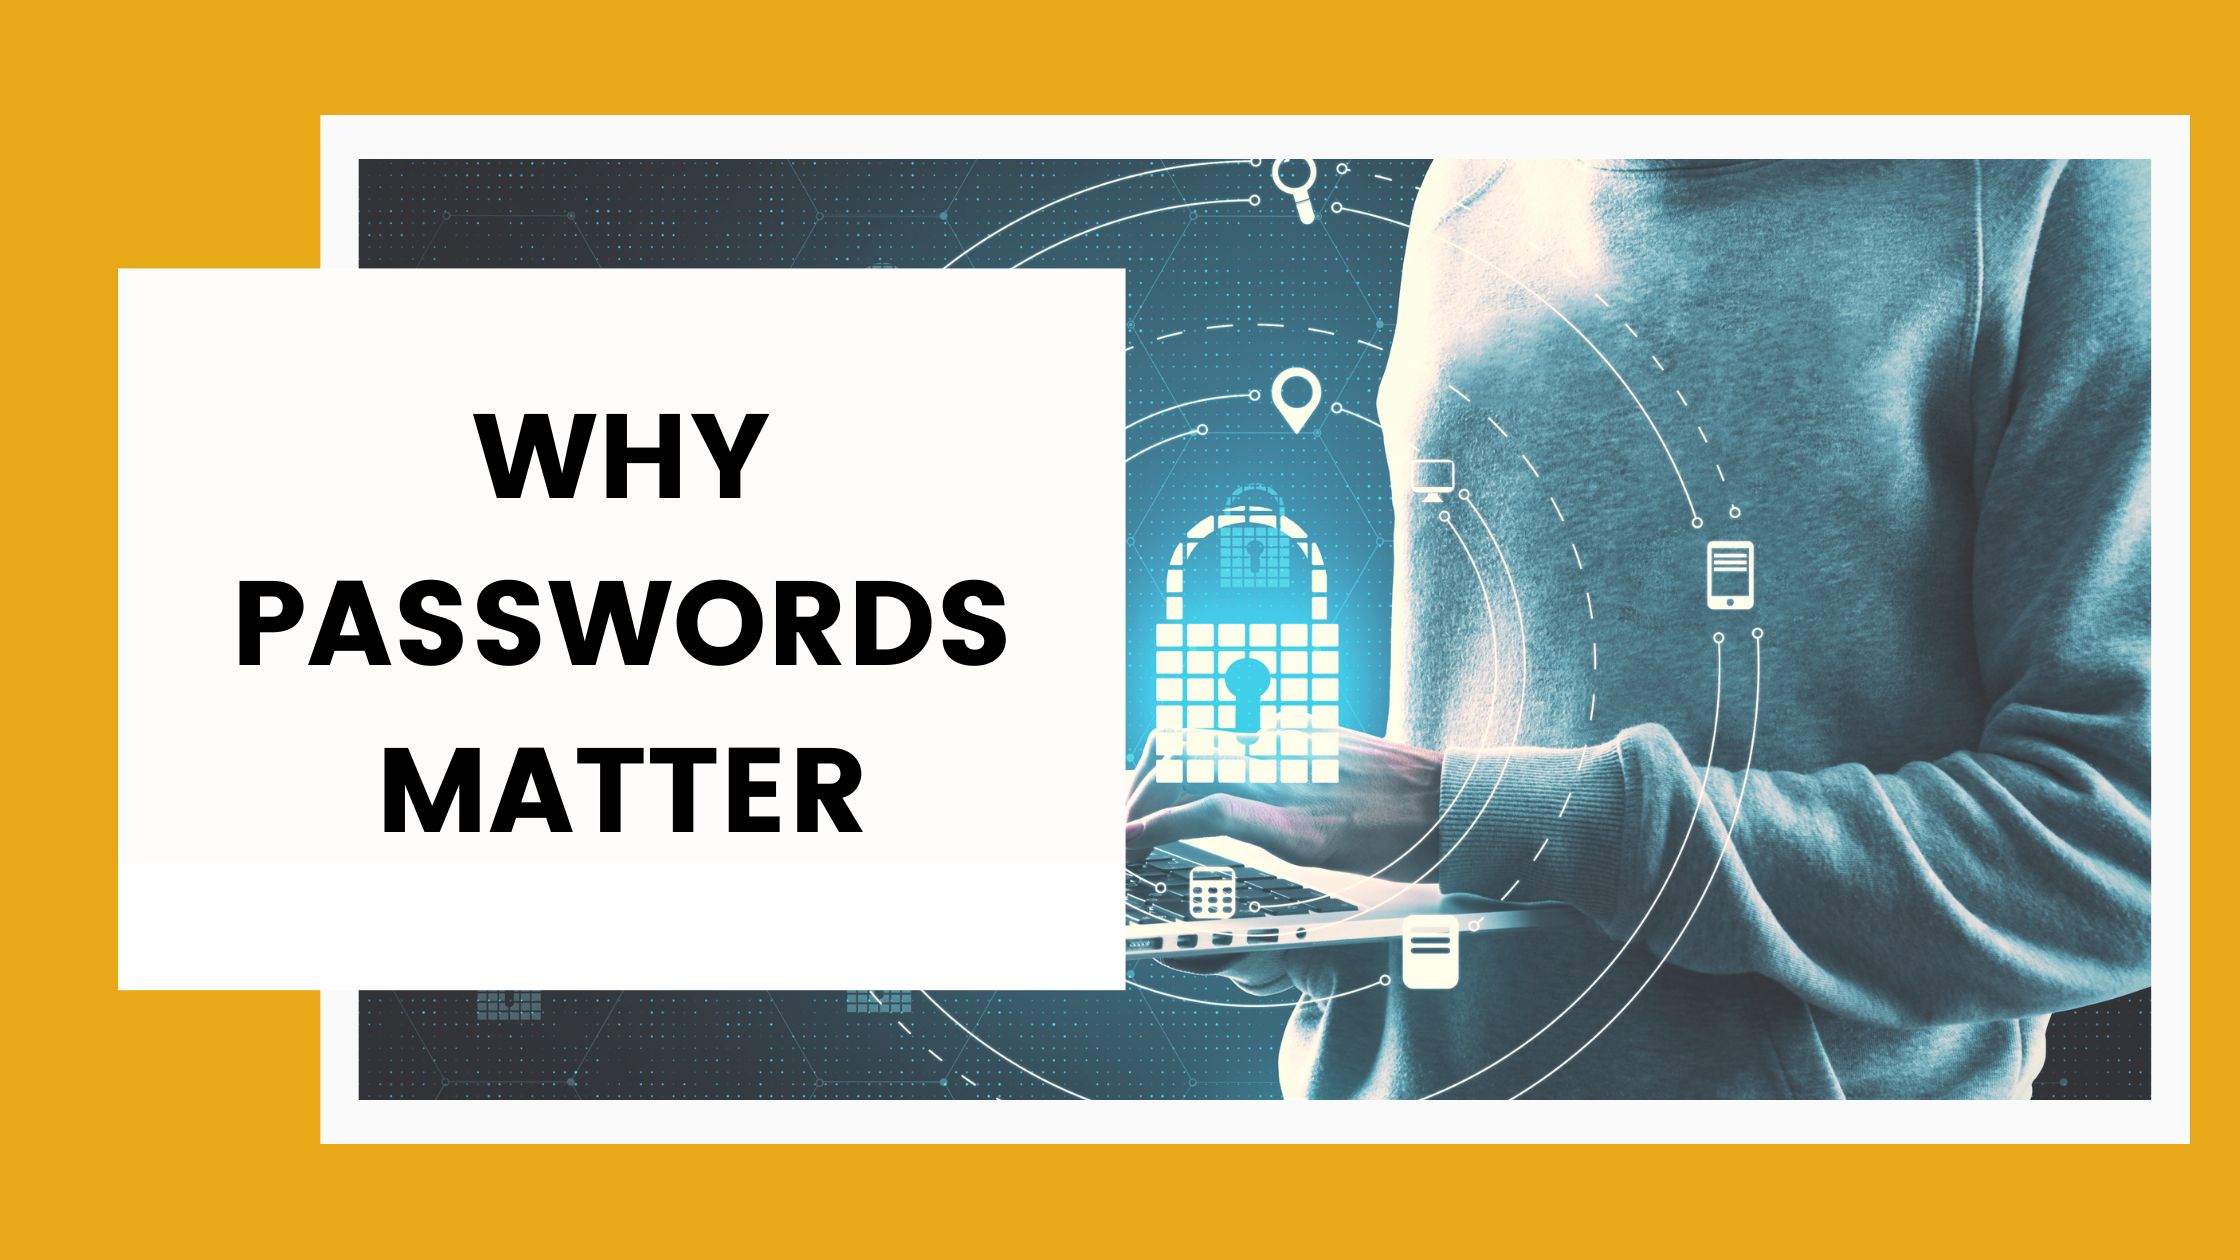 Why passwords matter!